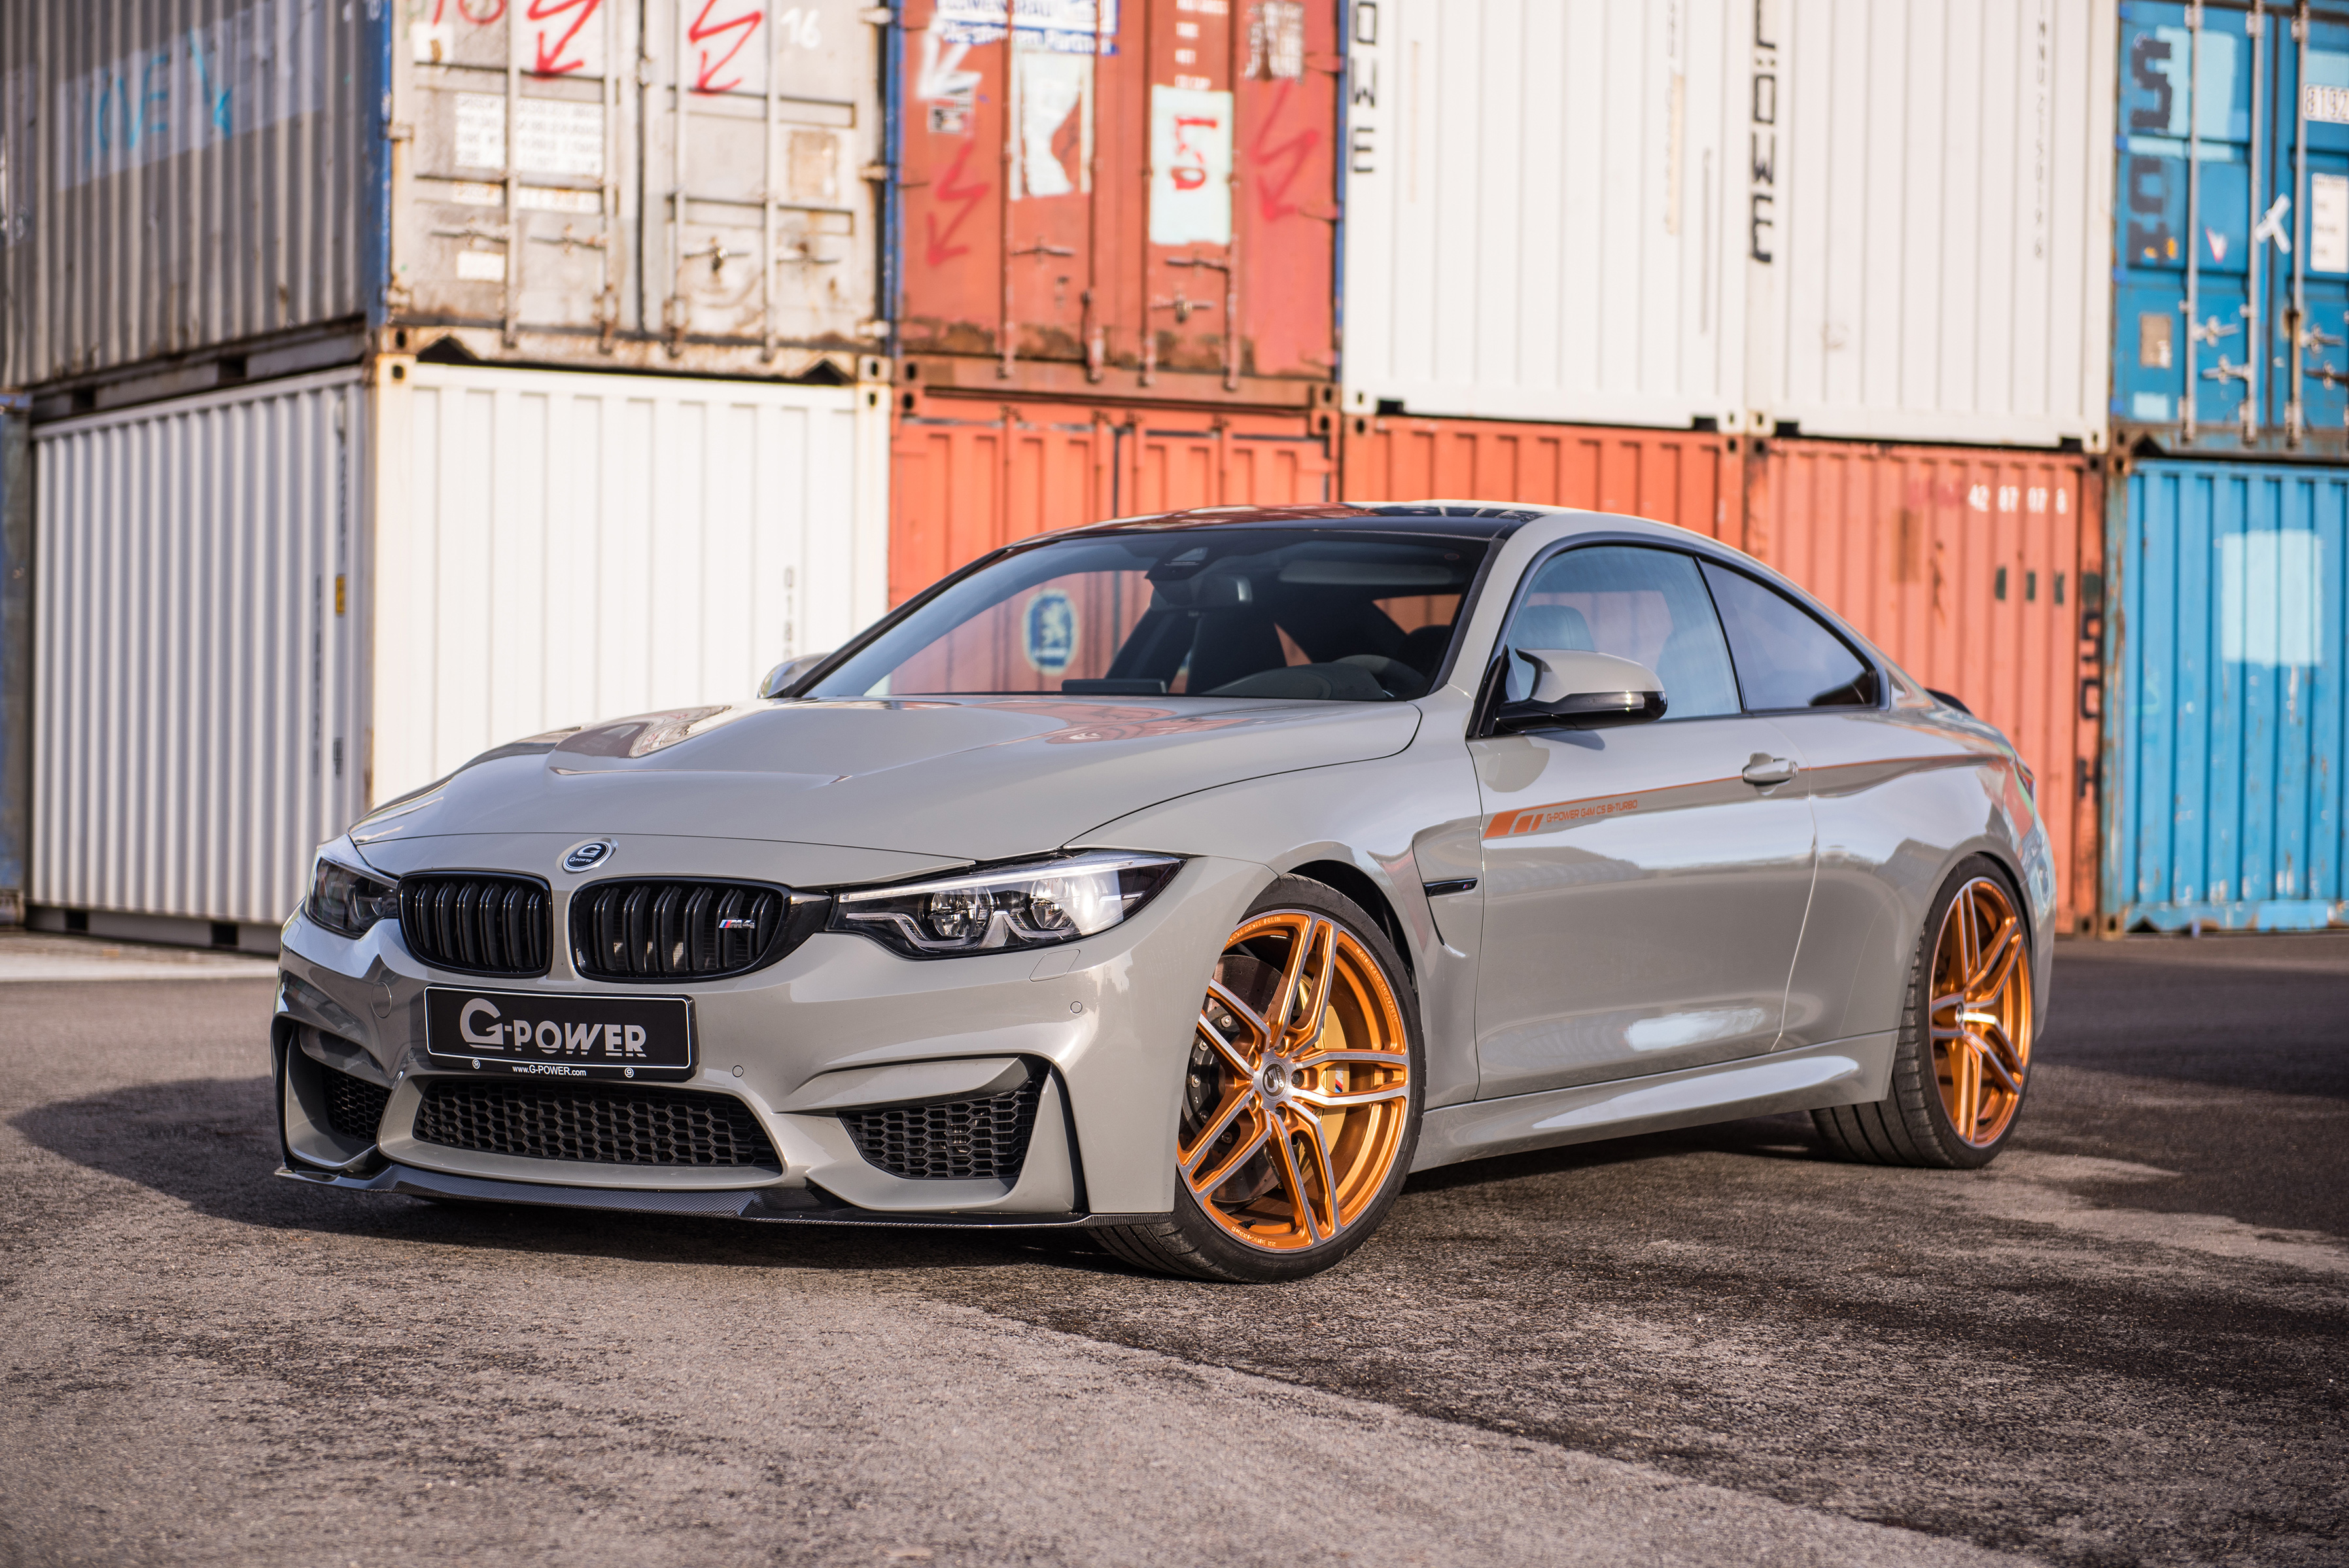 Unstoppable Power: The 2018 BMW M4 CS